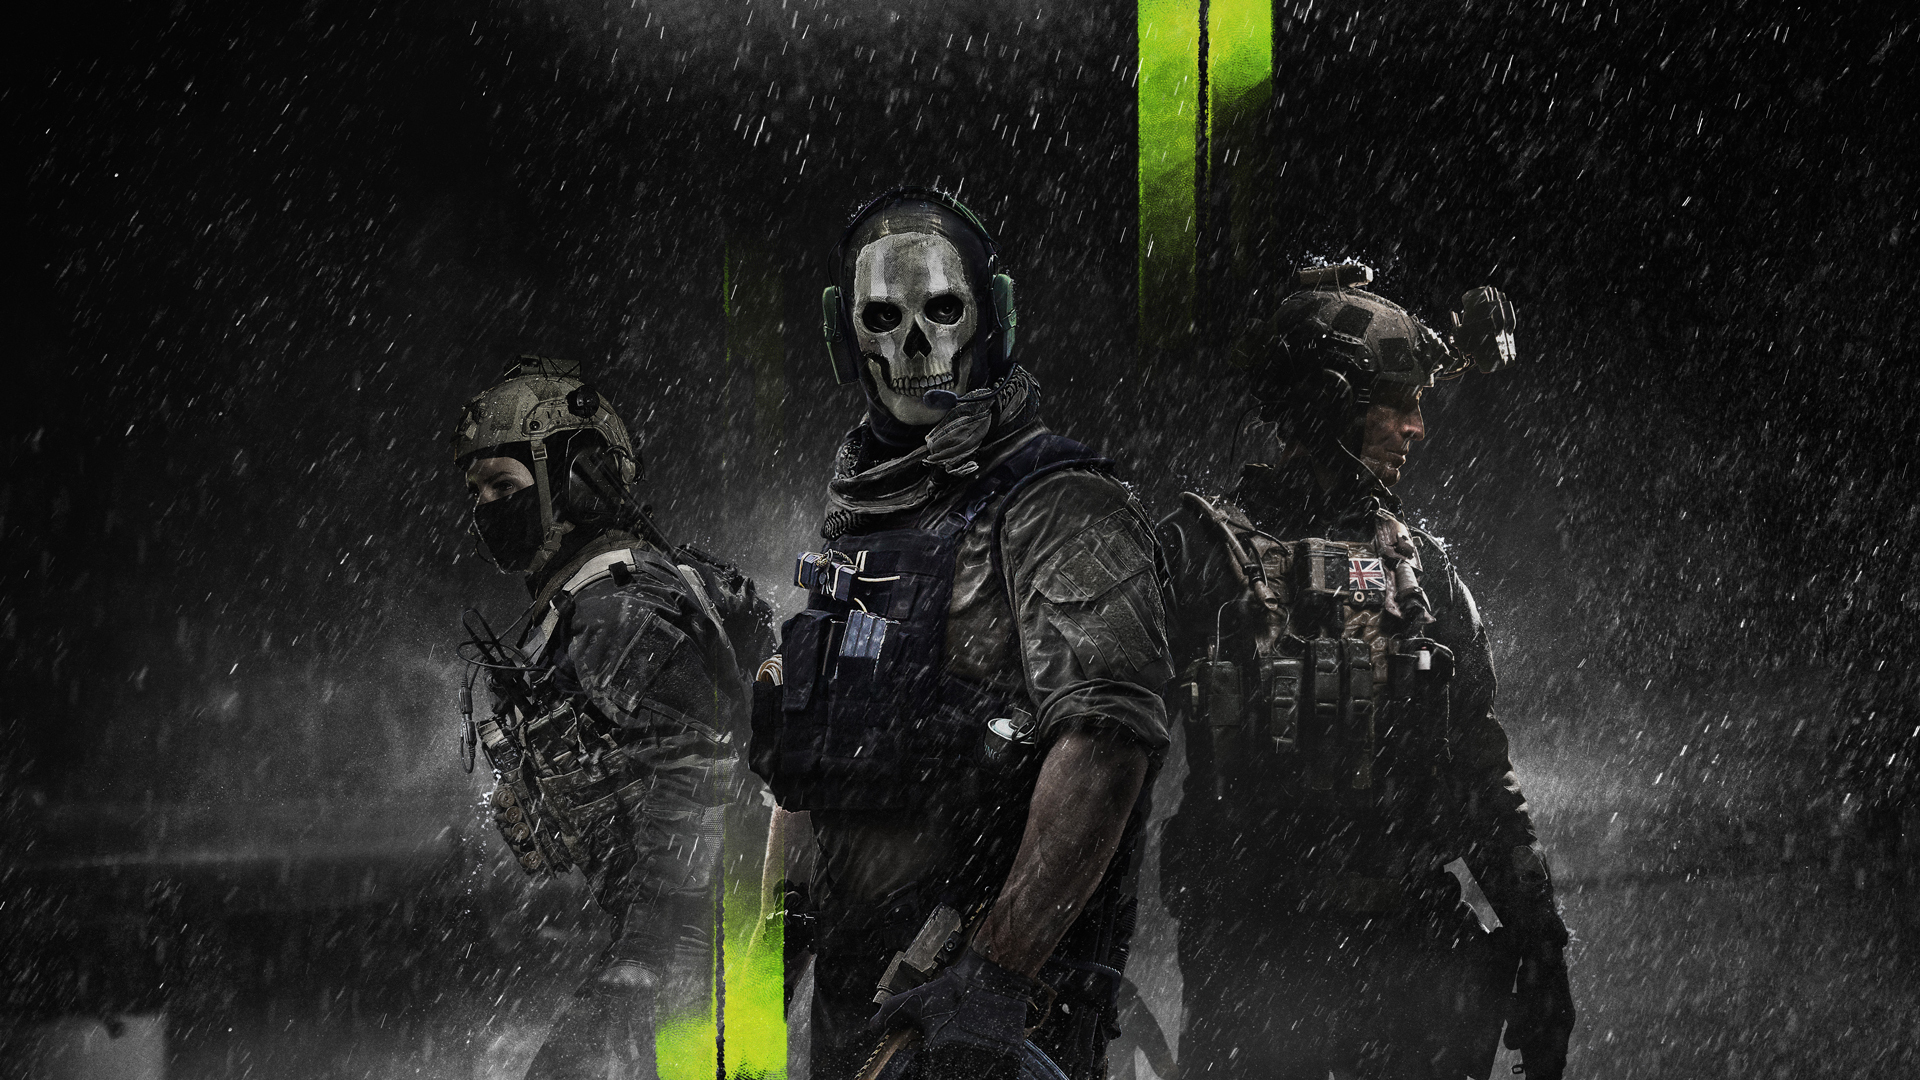 Ghost CoD Modern Warfare 2 Wallpaper requested from uDemigodKushal  Anyone feel free to use it as their wallpaper Hope you all like it   rCallOfDutyMobile